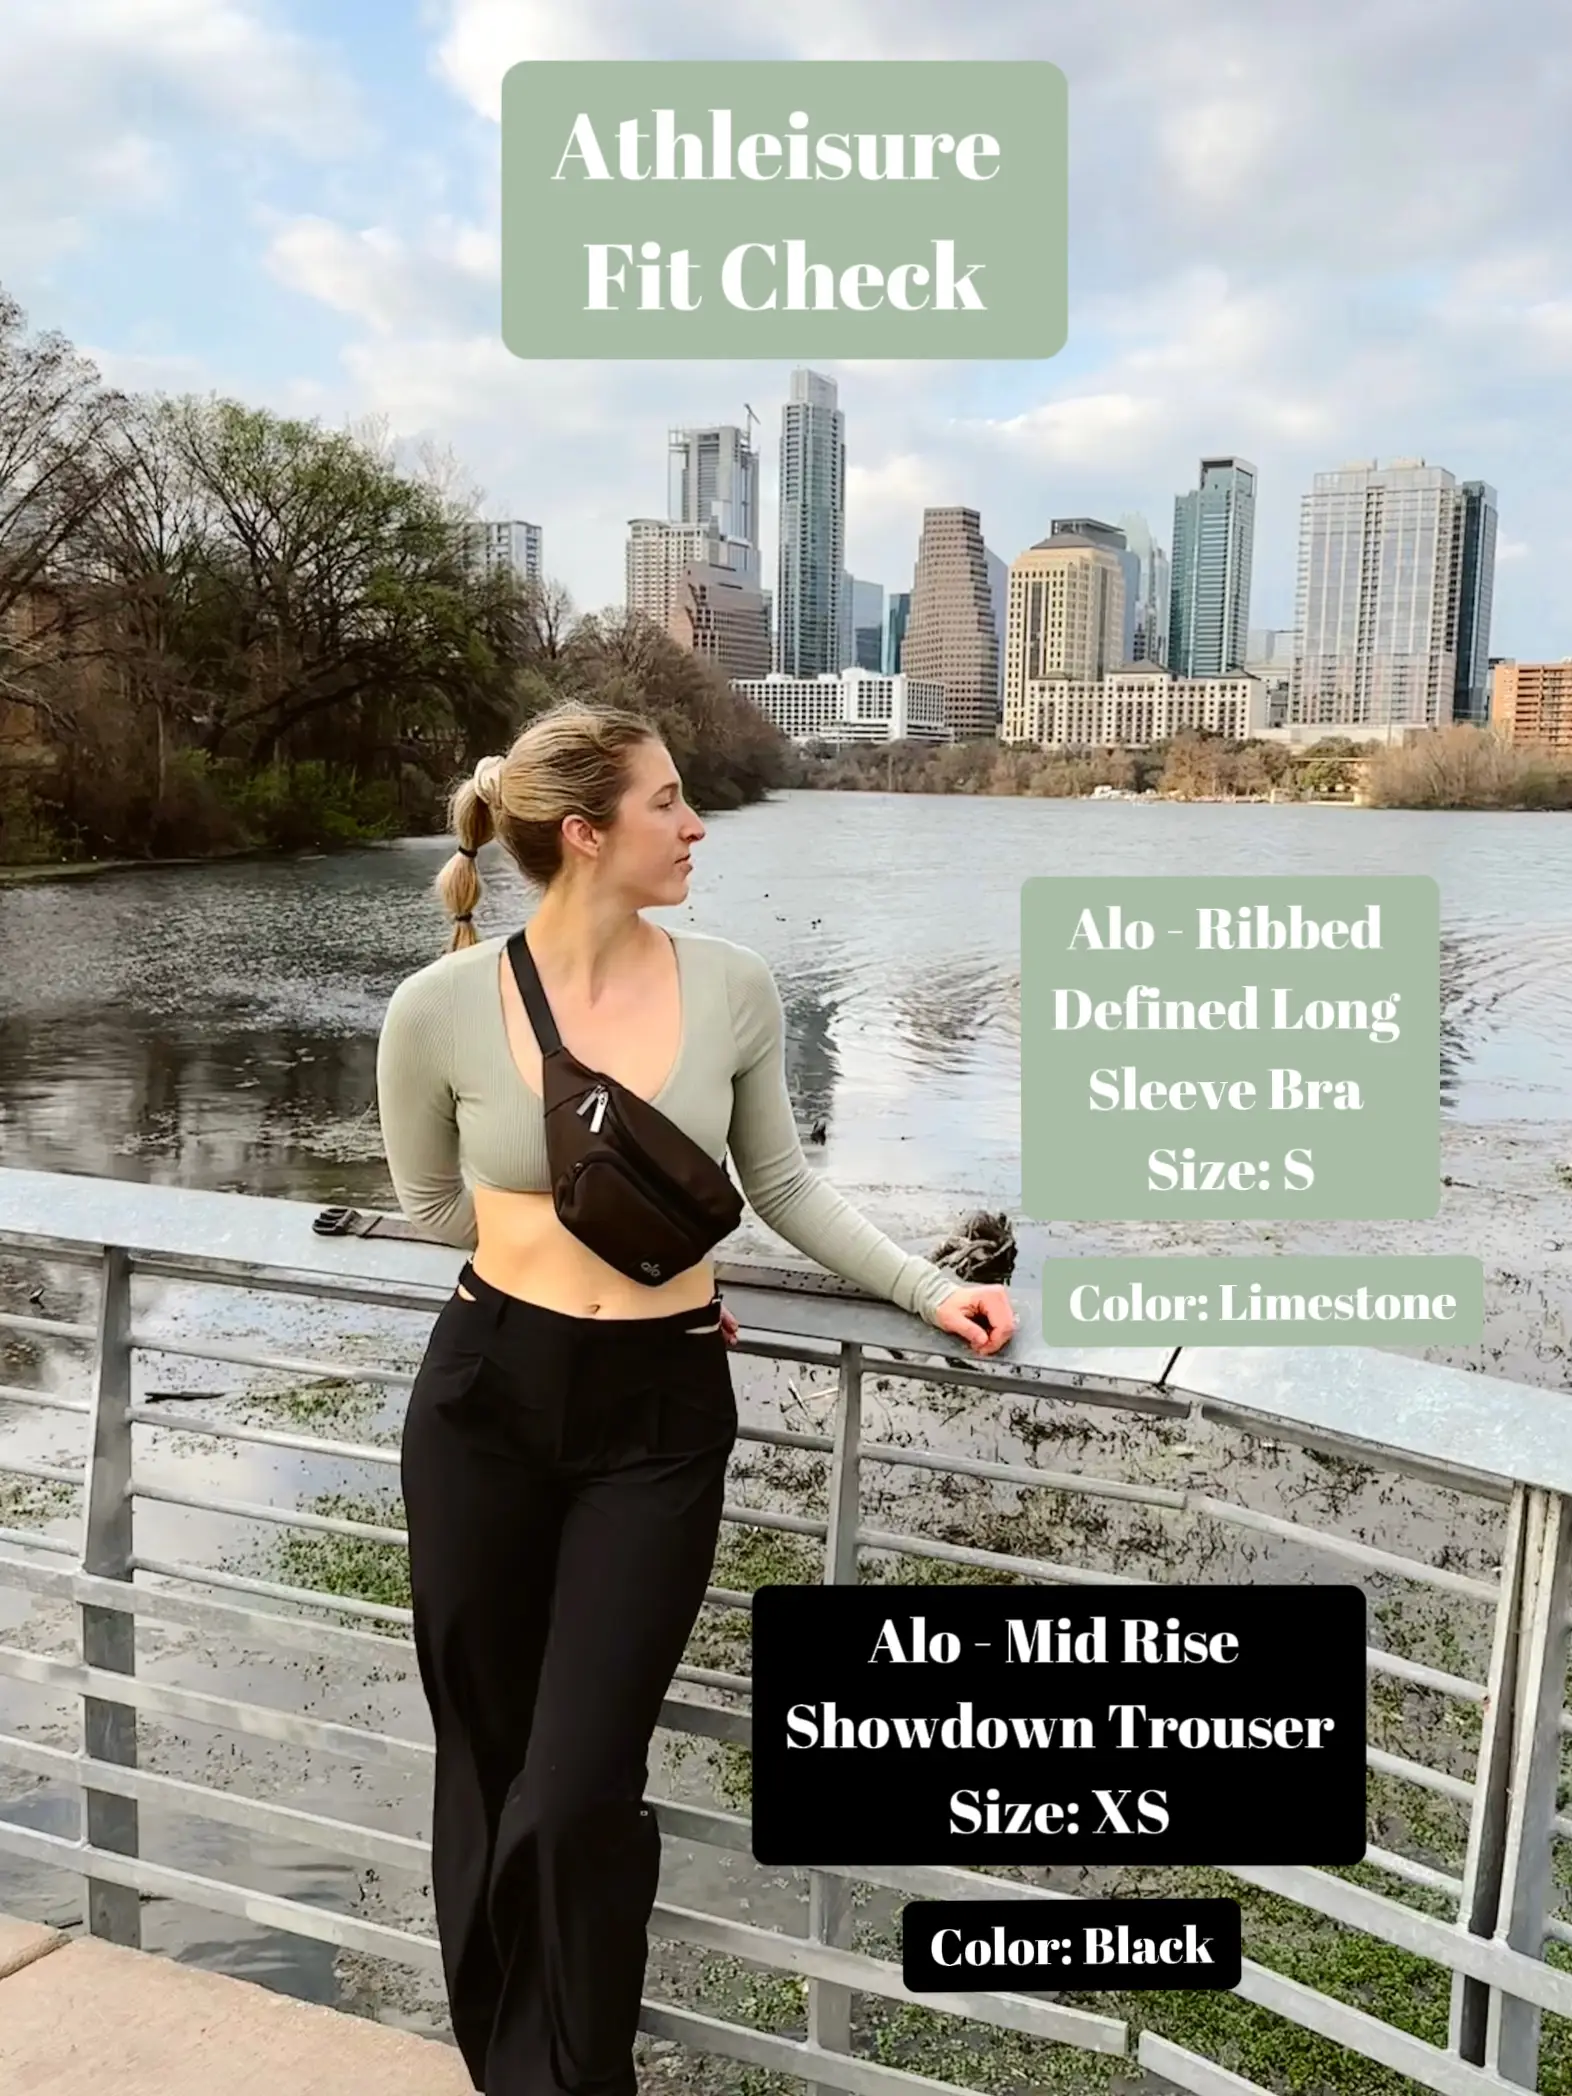 Alo Athleisure Fit Check, Gallery posted by Courtney May